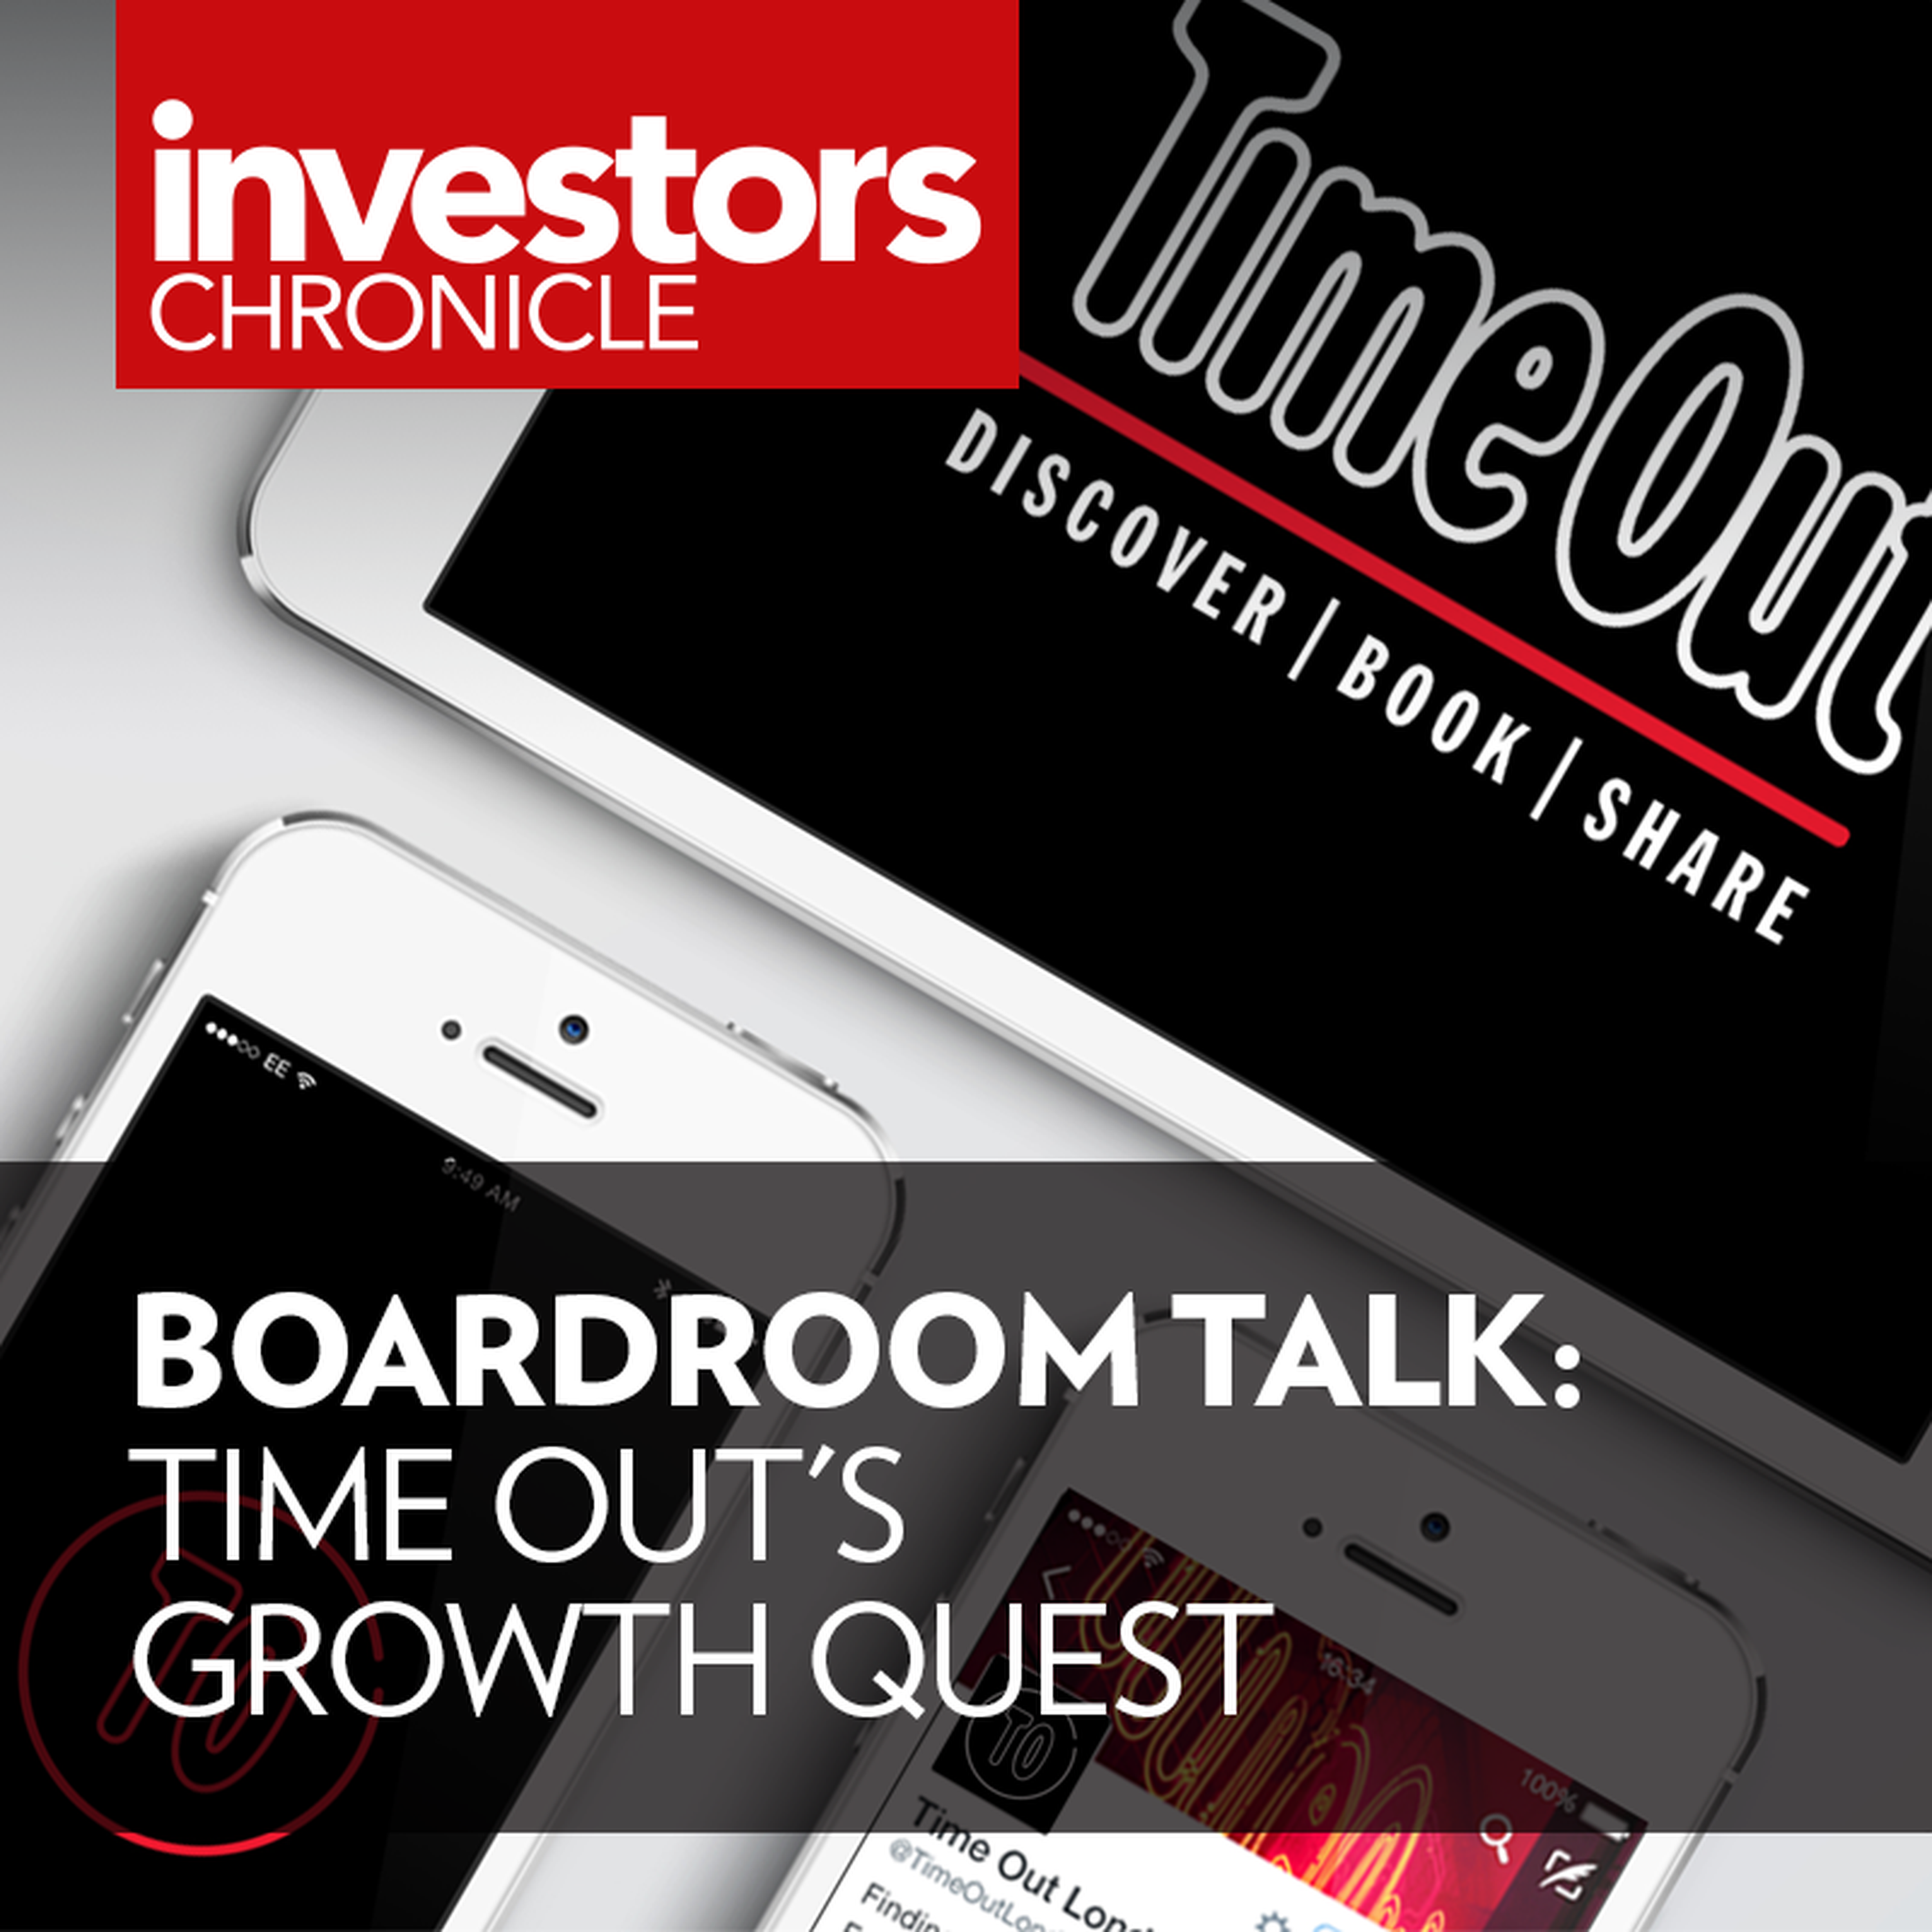 Boardroom Talk: Time Out's growth quest